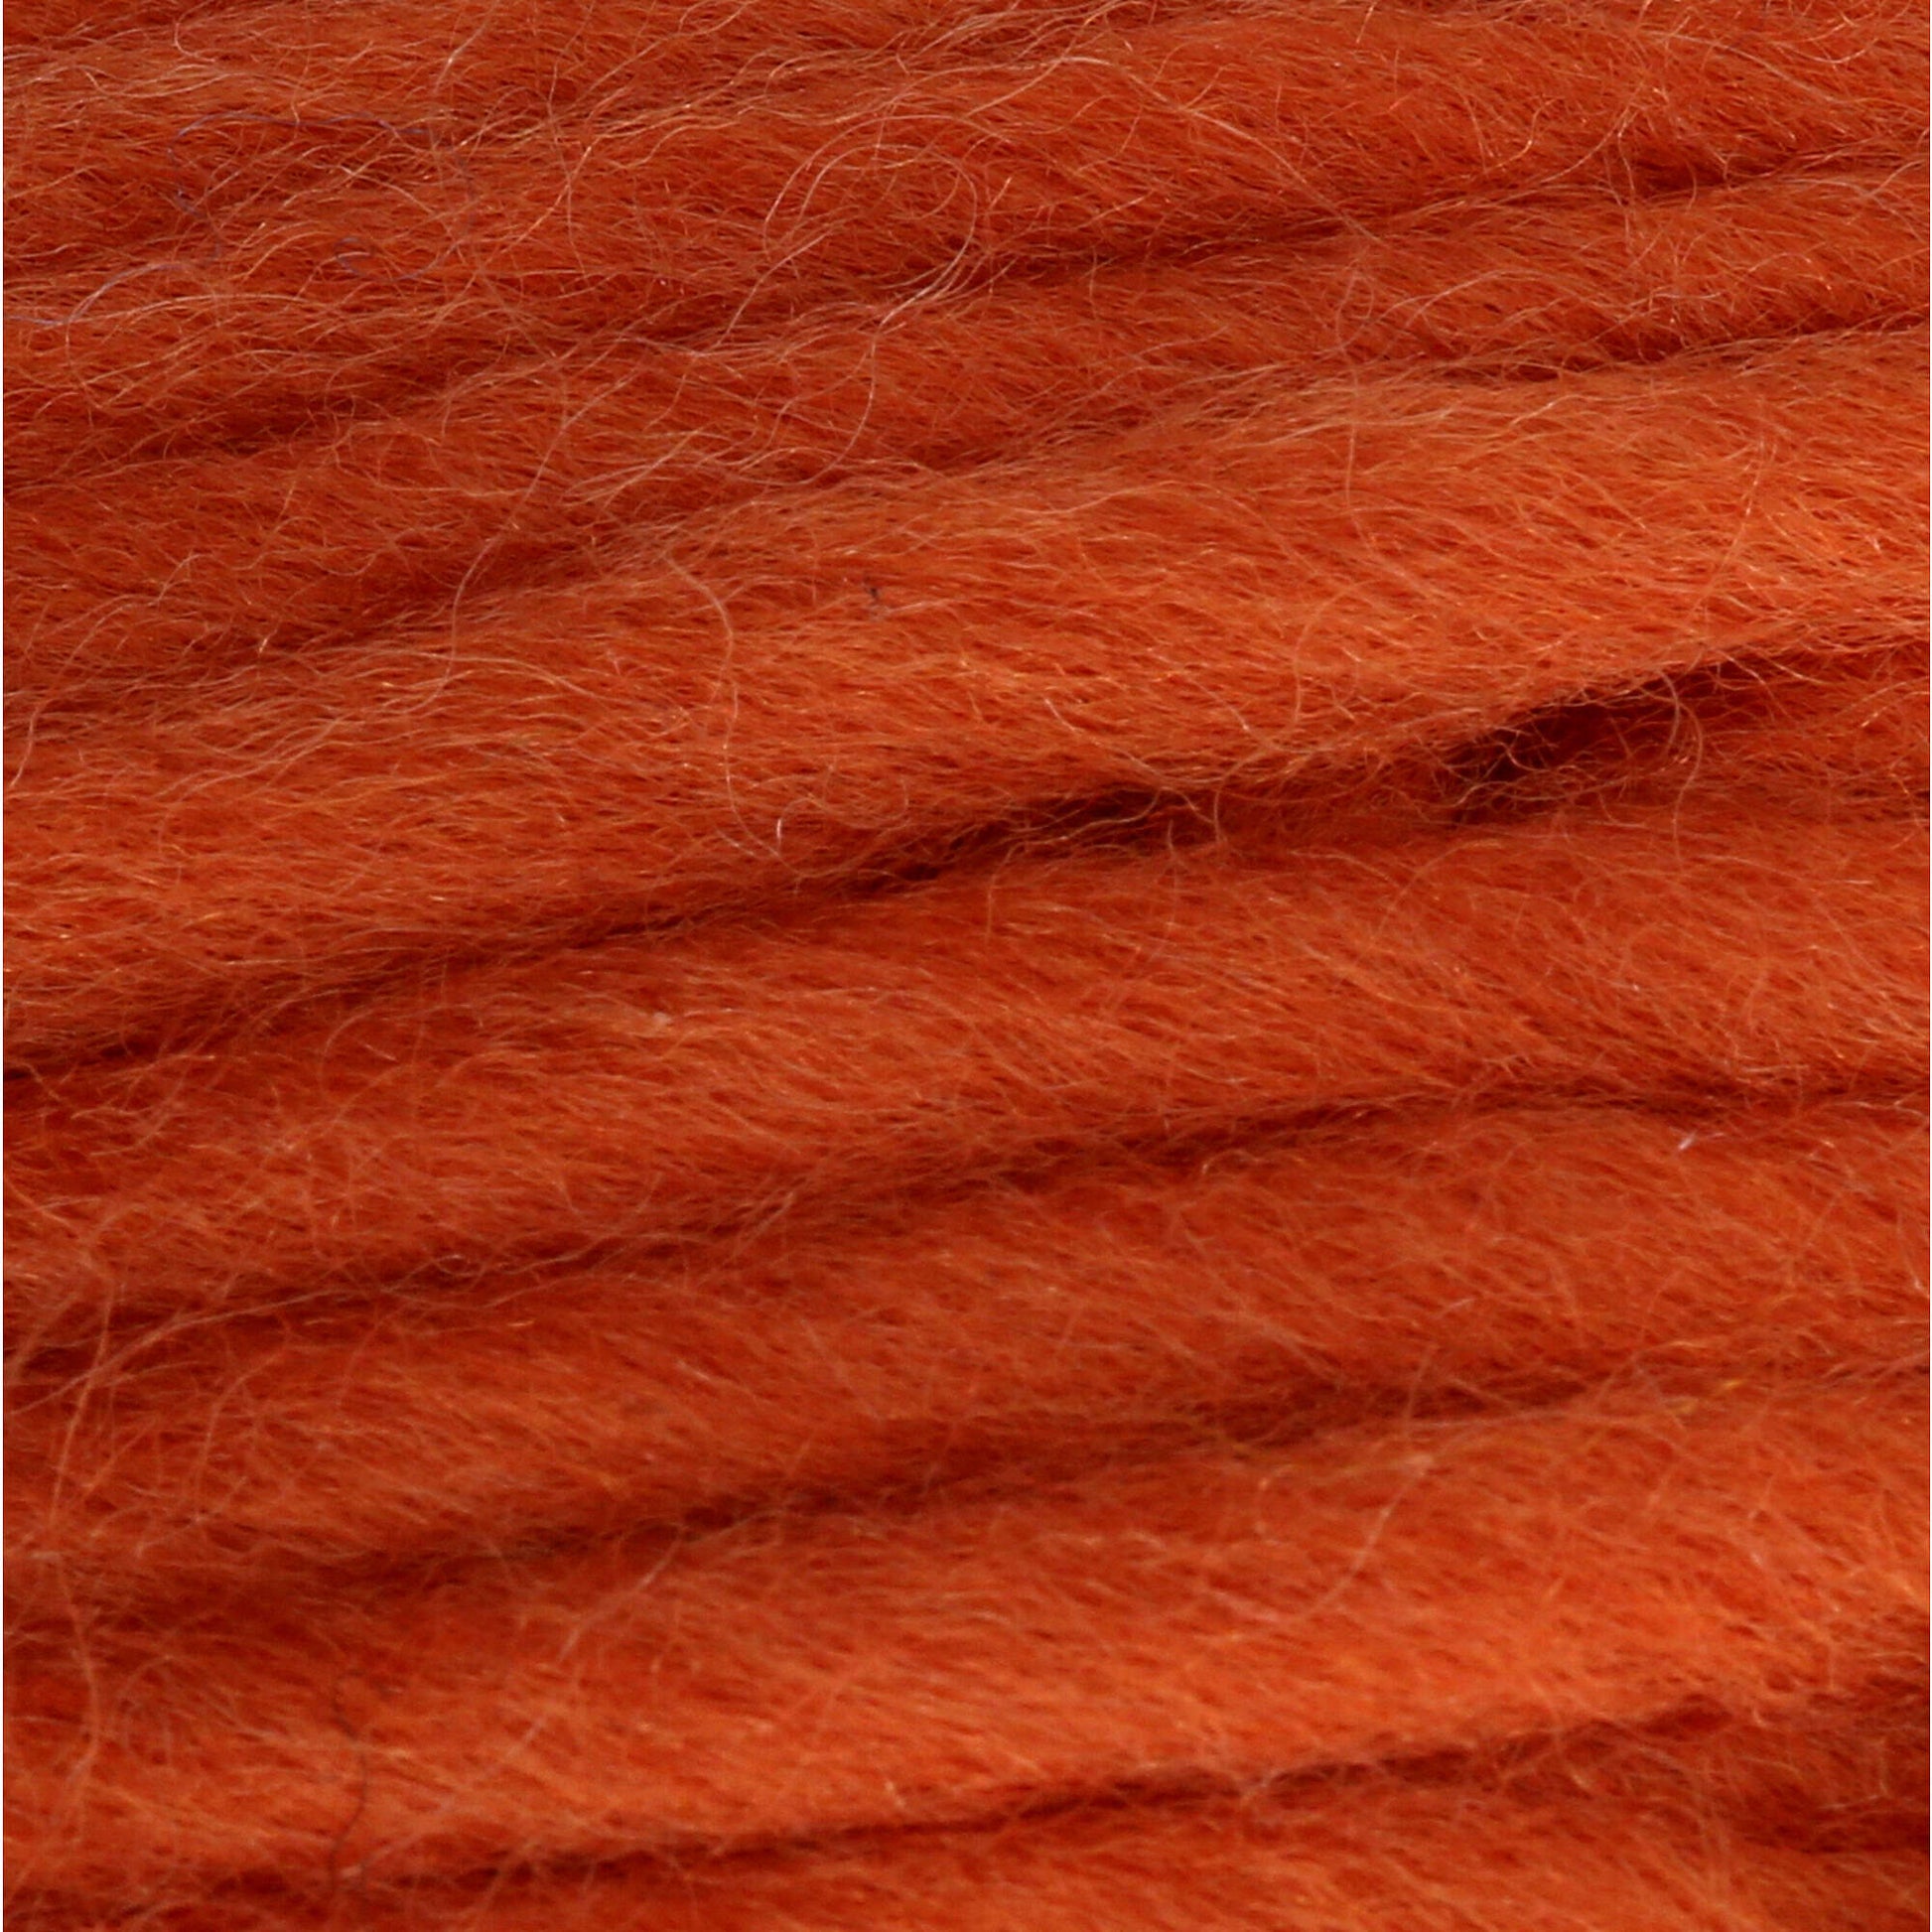 Patons Classic Wool Roving Yarn - Discontinued Shades